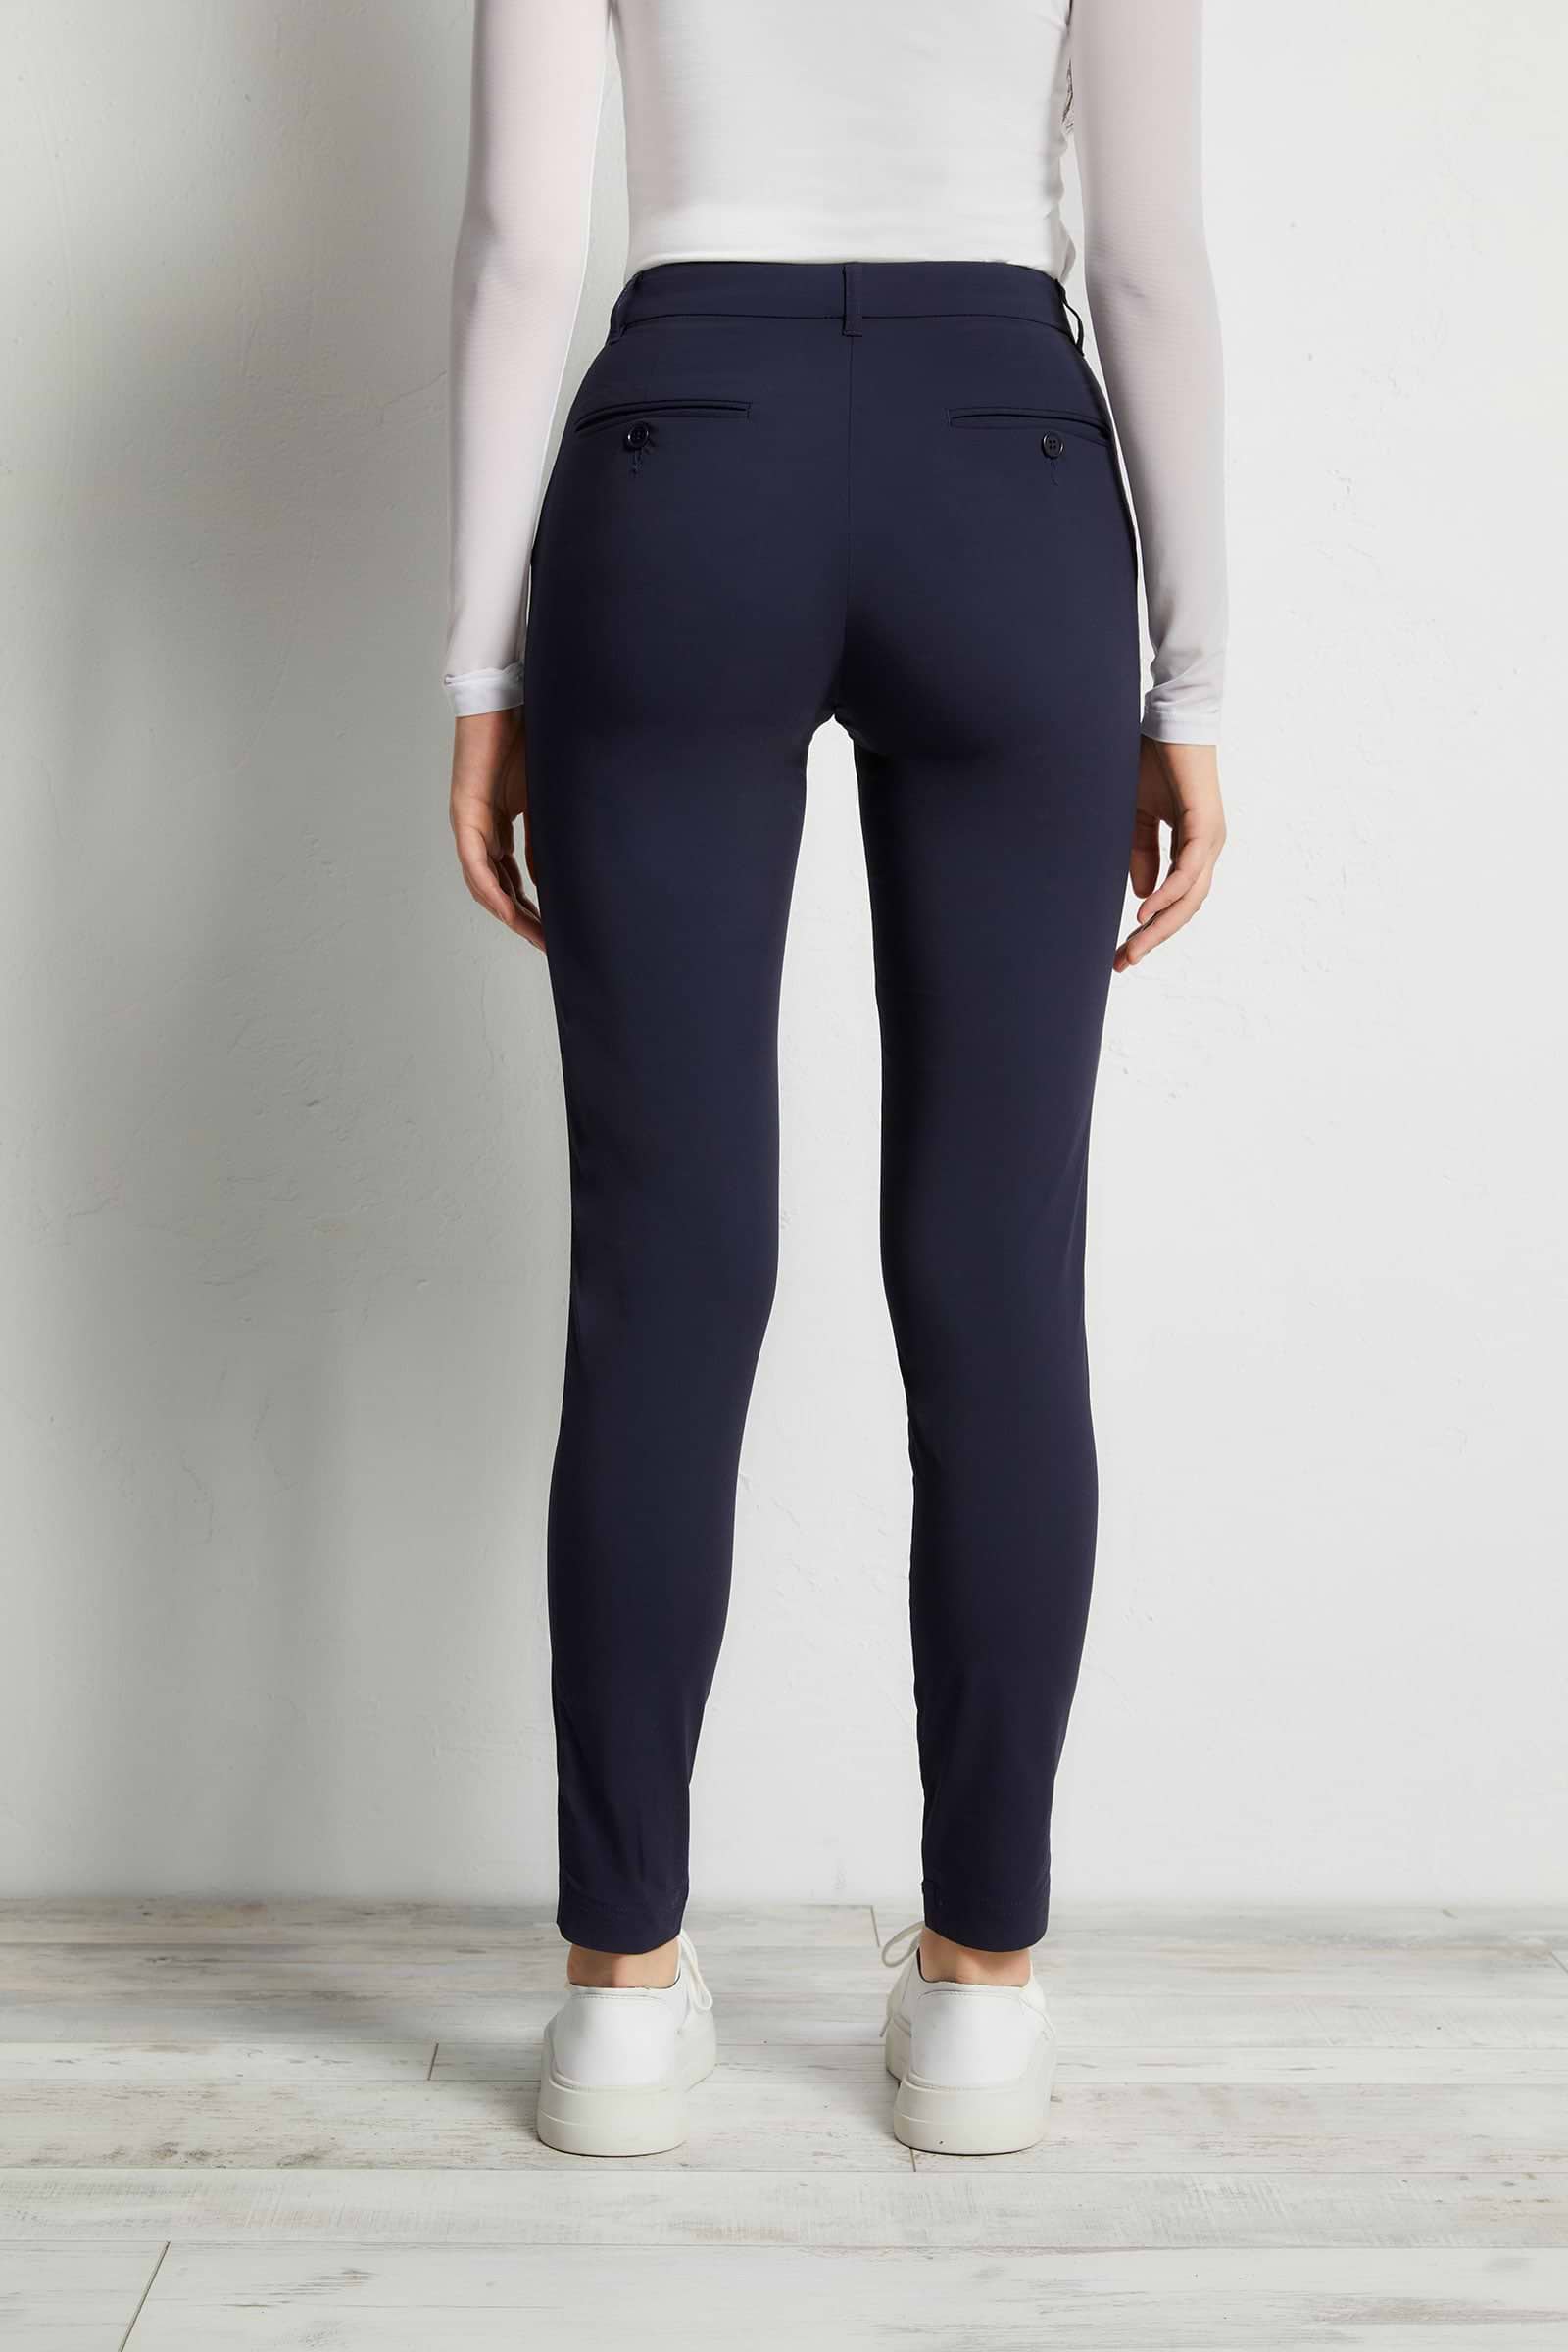 The Best Travel Pants. Back Profile of the Thea Curvy Pant in Navy.